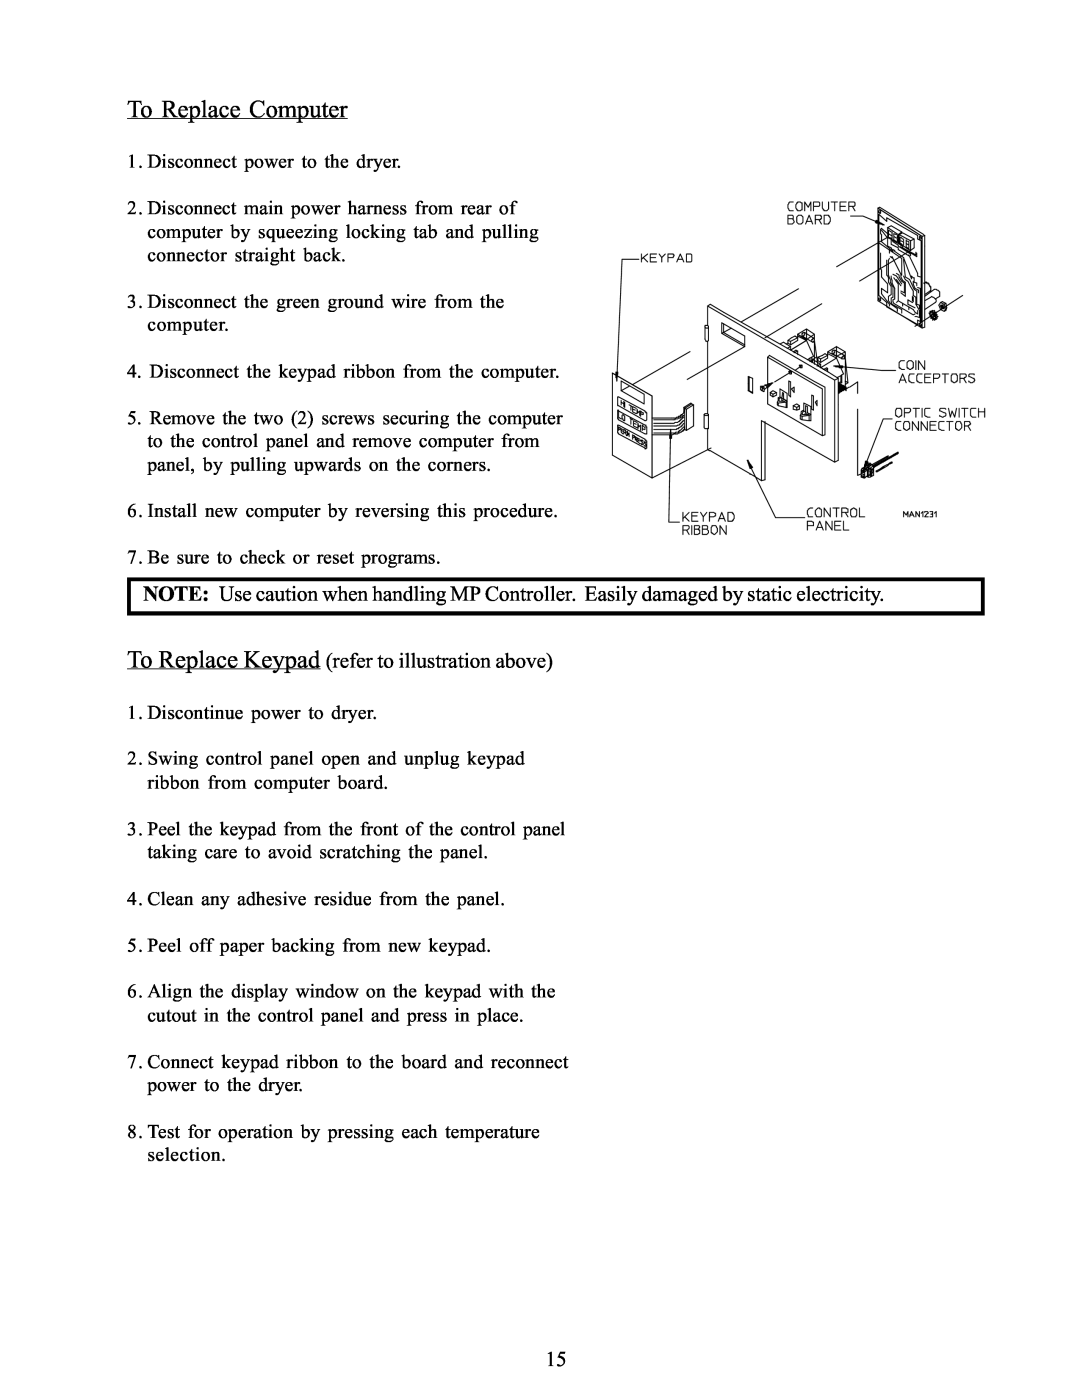 American Dryer Corp WDA-385 service manual To Replace Computer, To Replace Keypad refer to illustration above 